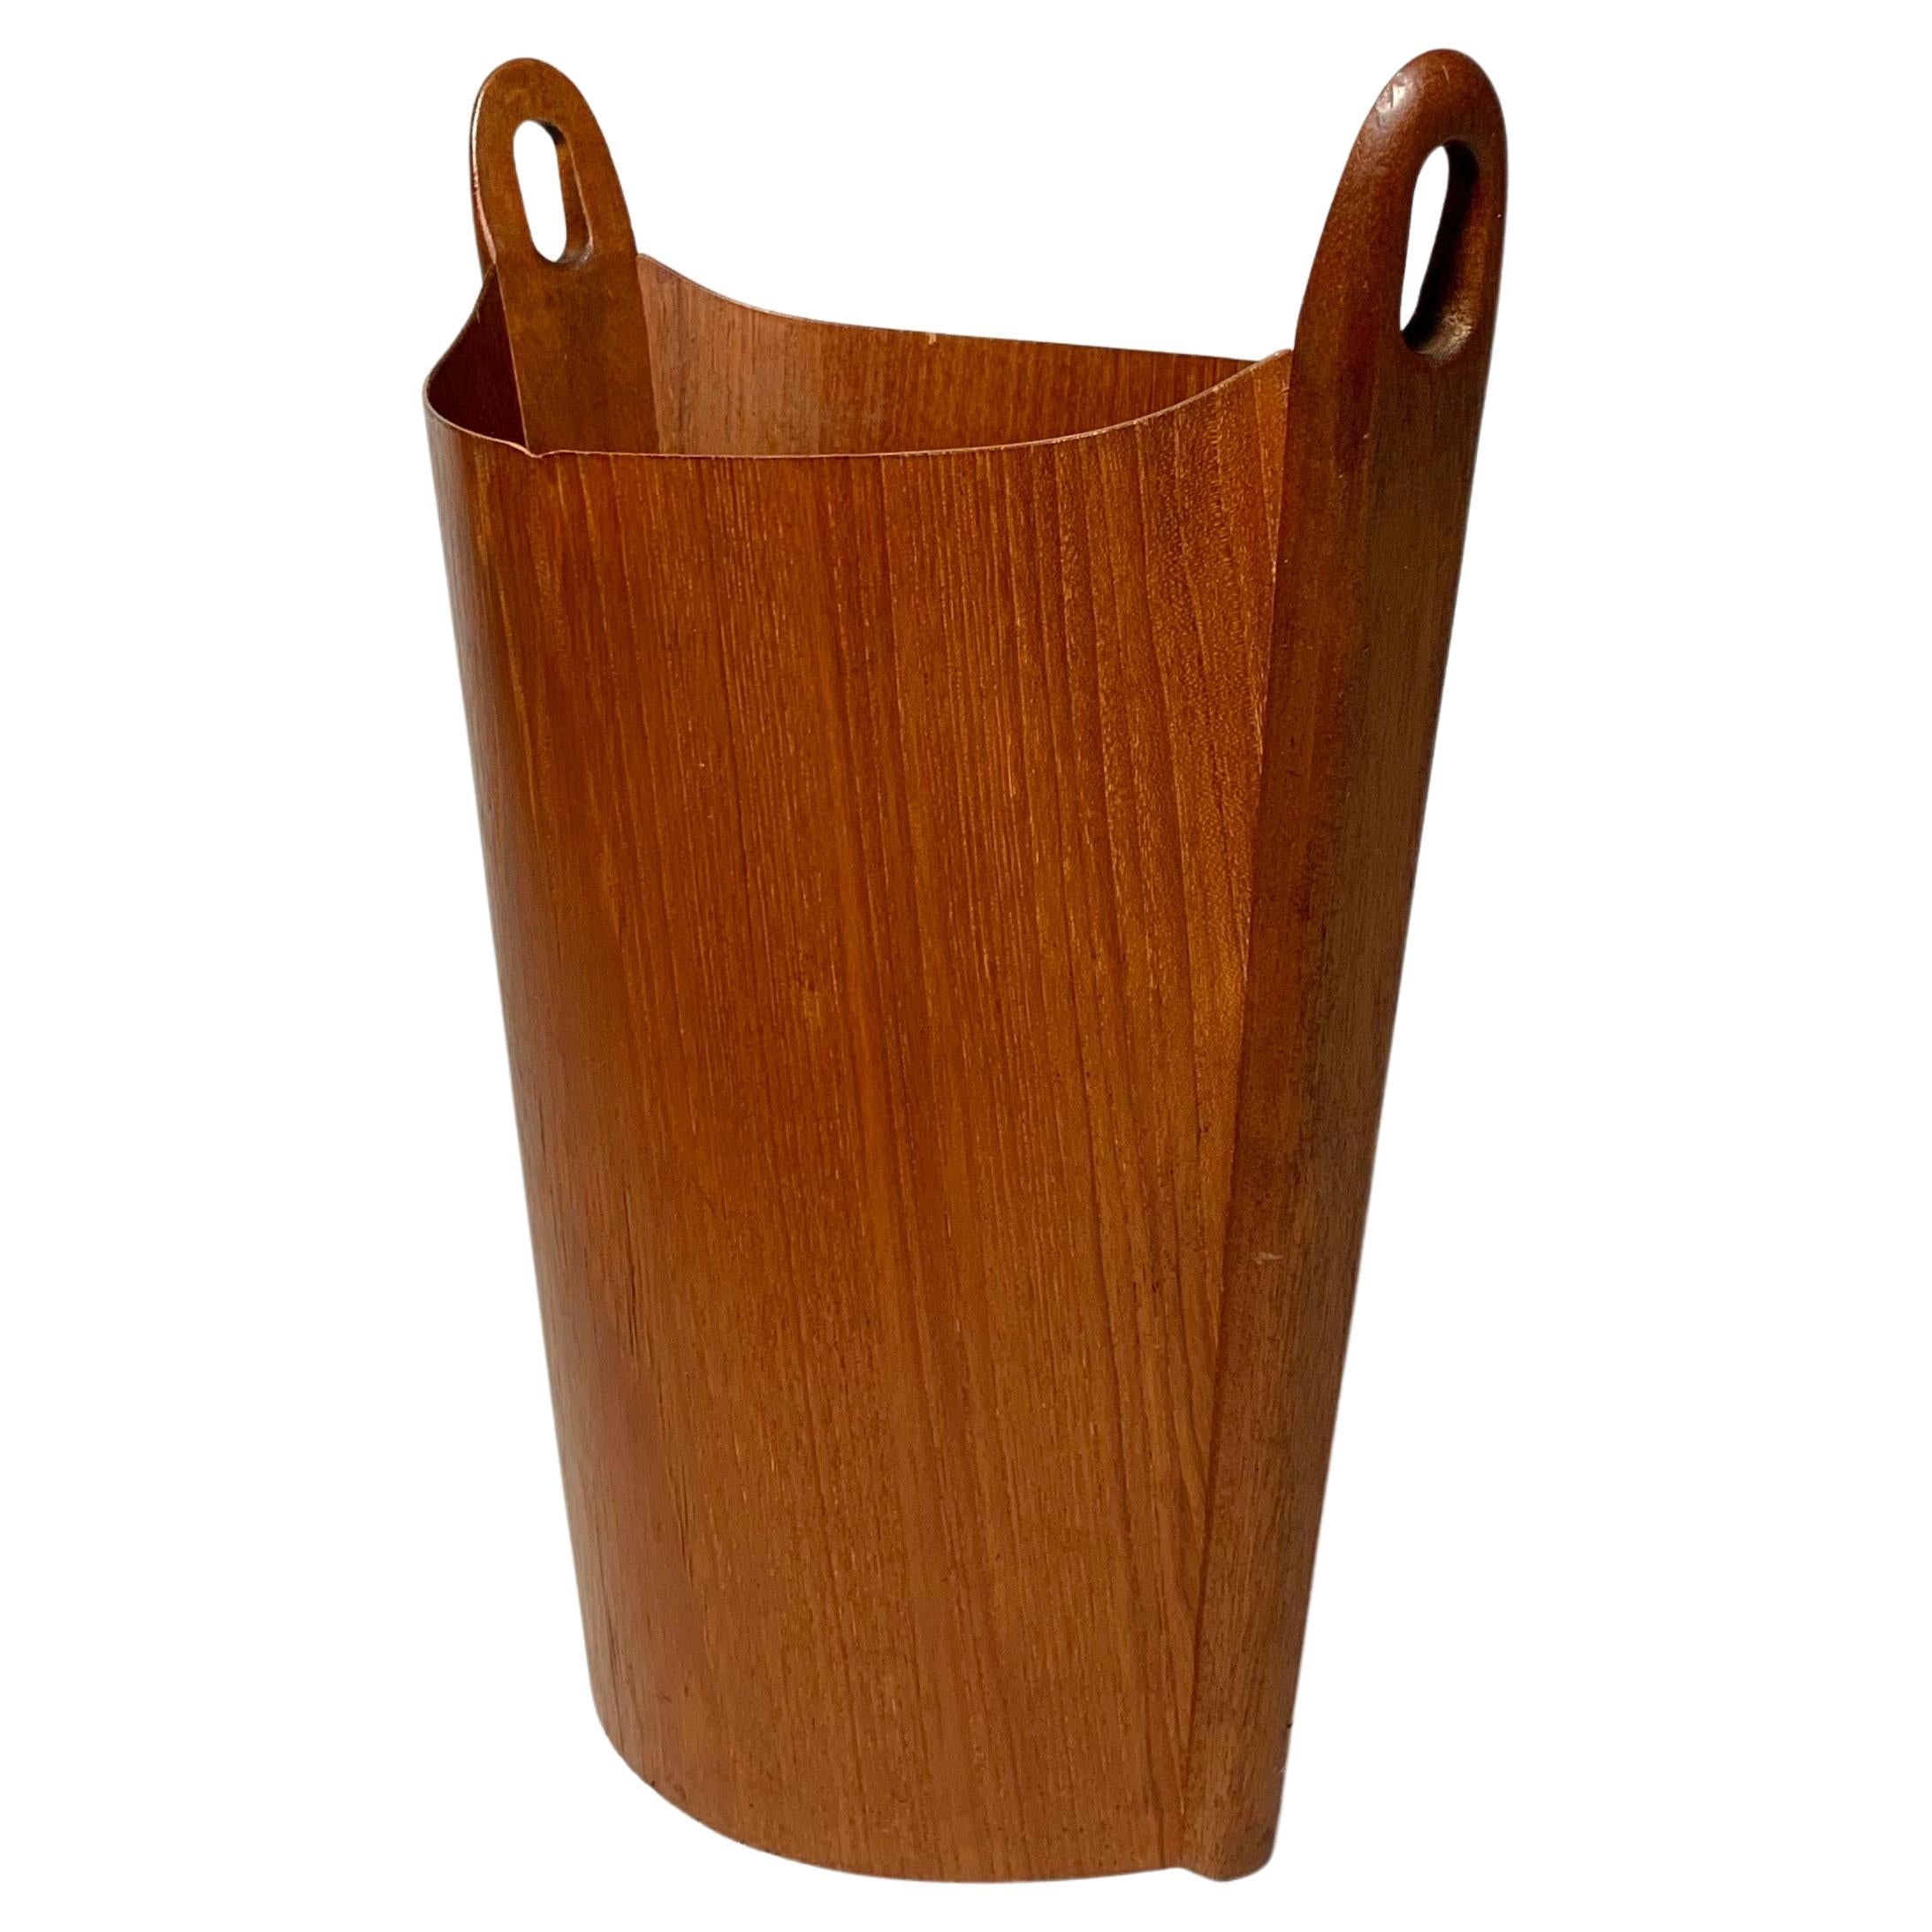 Paper waste basket, model ‚Oval’ designed by Einar Barnes in 1969 and produced by P.S. Heggen in Norway in the 1970s.

Teak plywood with solid teak handles on both sides. Stamped on the inside bottom.

Measures: Height: 44 cm
Width: 38